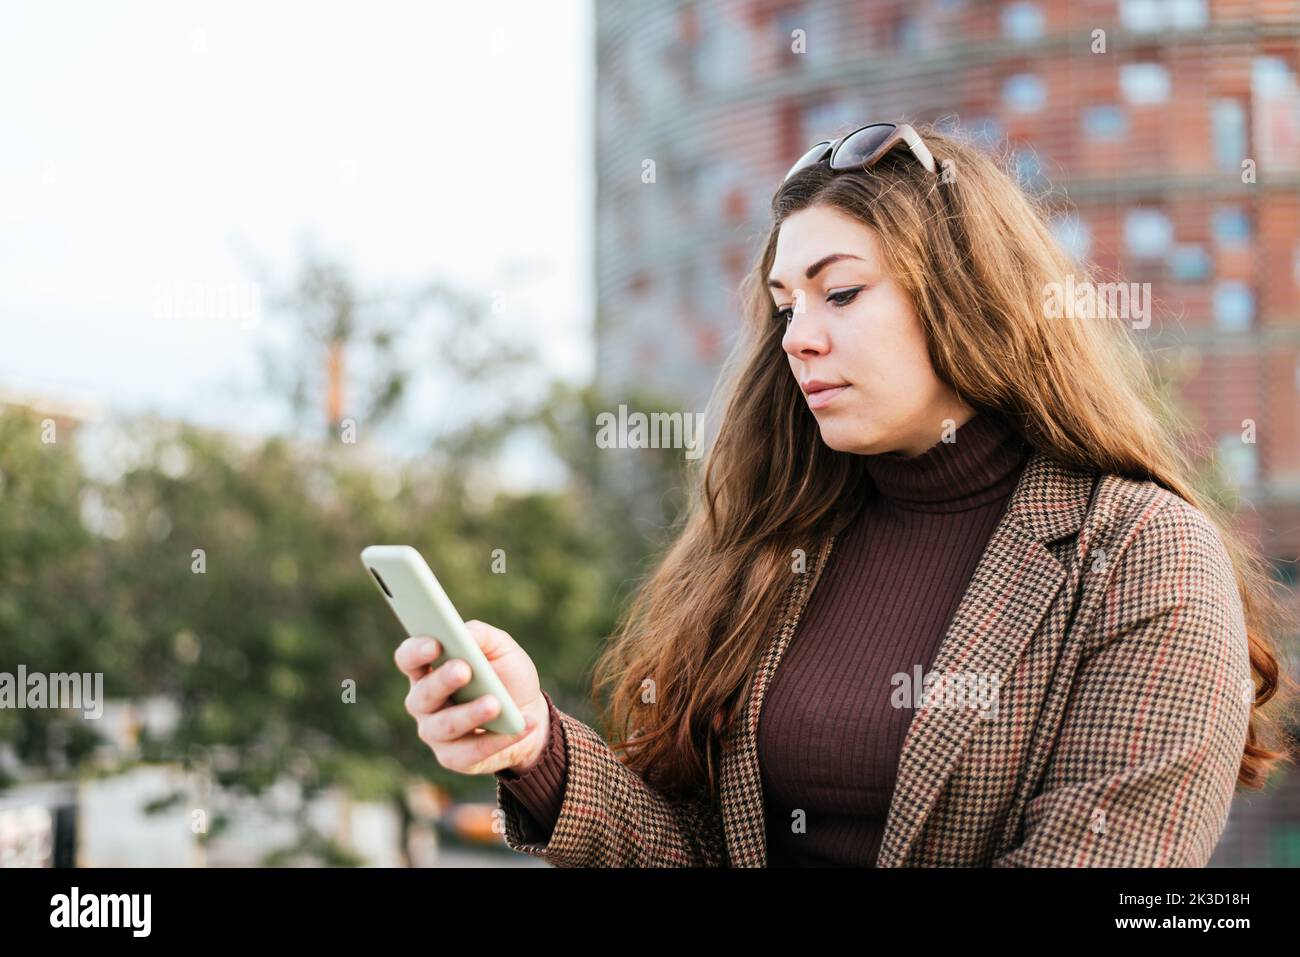 Woman in outerwear with long hair browsing social media on cellphone while standing on blurred background of city street in daytime Stock Photo